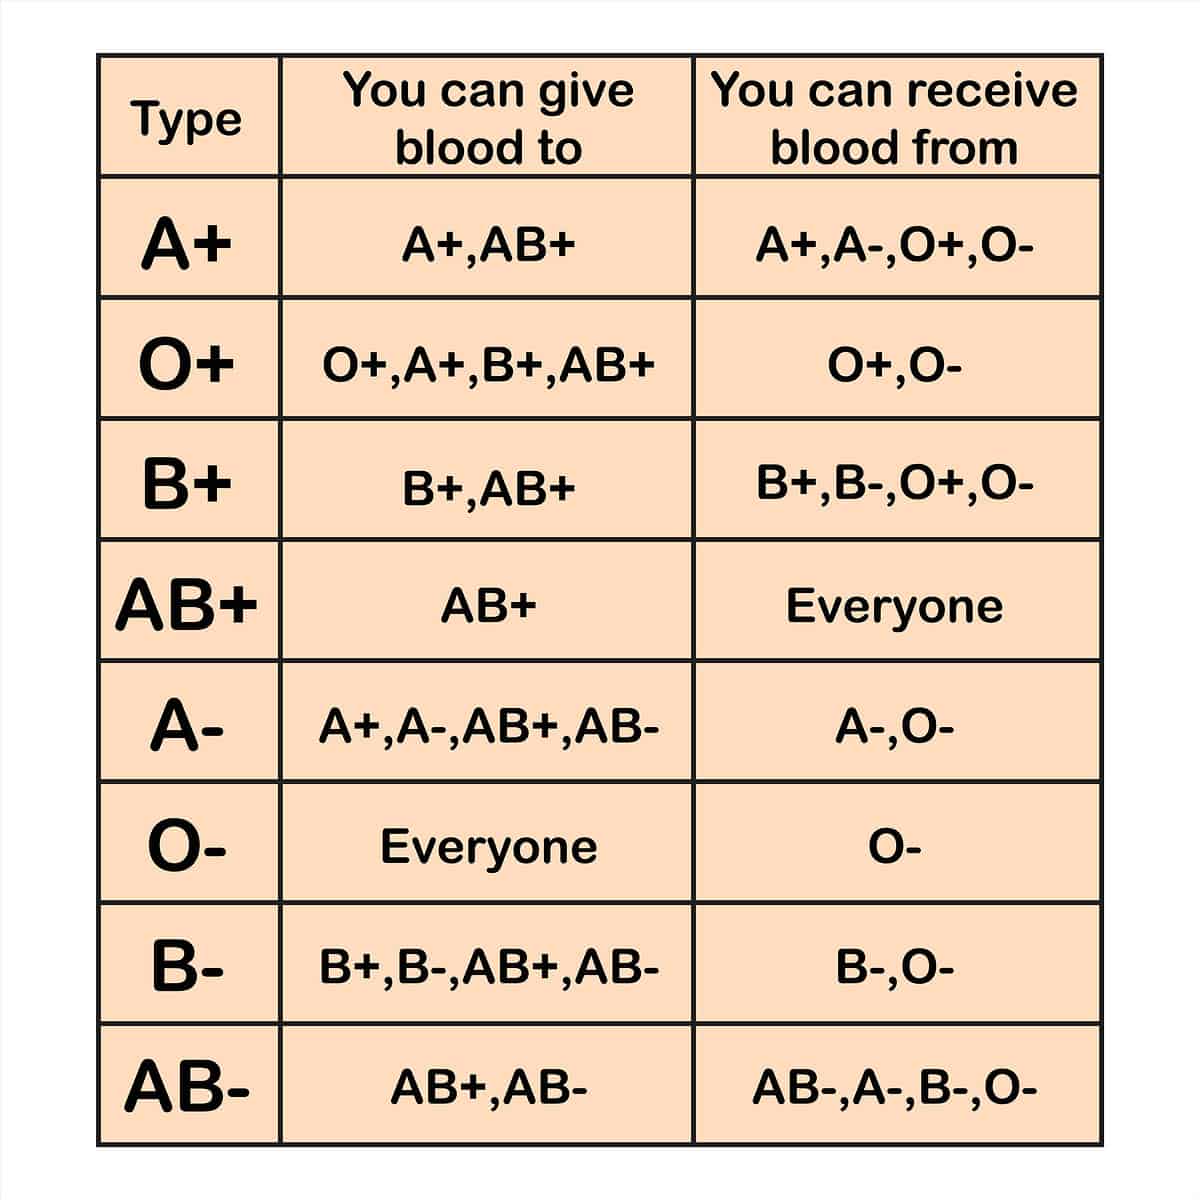 Blood type chart that shows blood groups